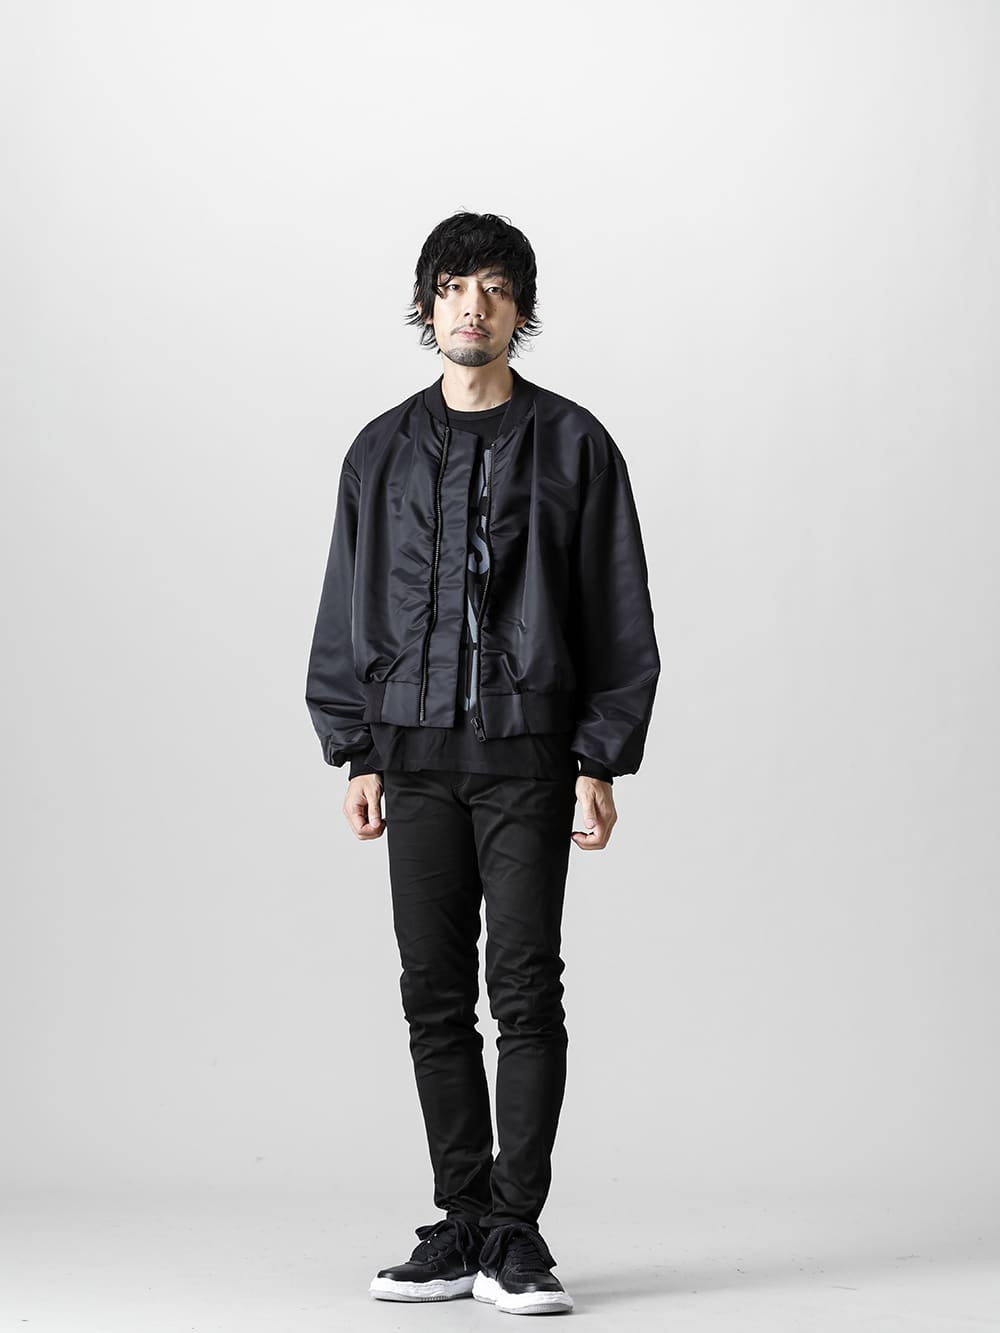 A new item from LAD MUSICIAN, 2021-22 AW is now in stock